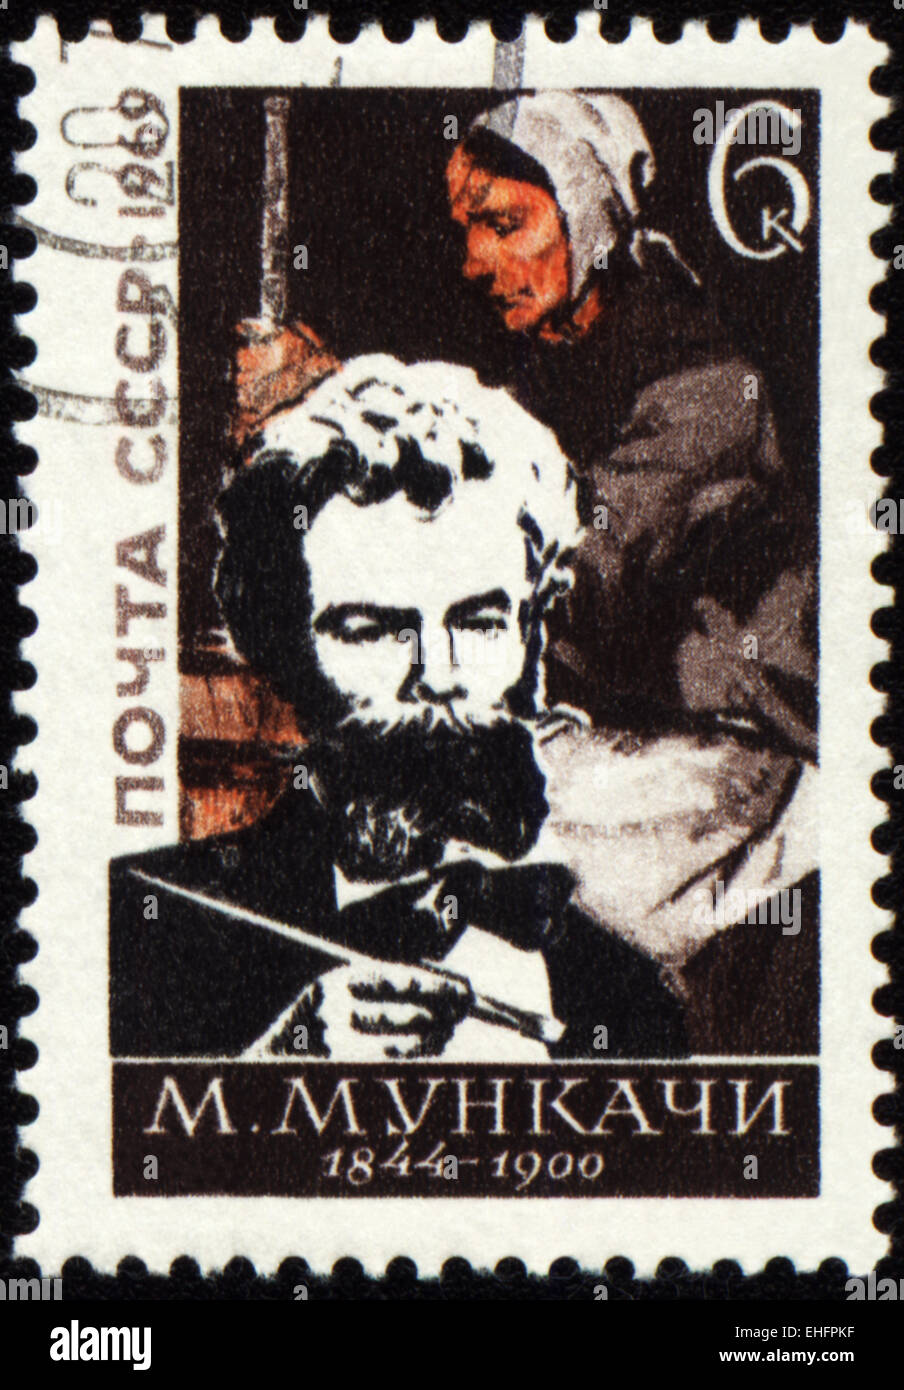 USSR - CIRCA 1969: A stamp printed in USSR shows portrait of Hungarian painter Munkacsy Mihaly (1844-1900) Stock Photo